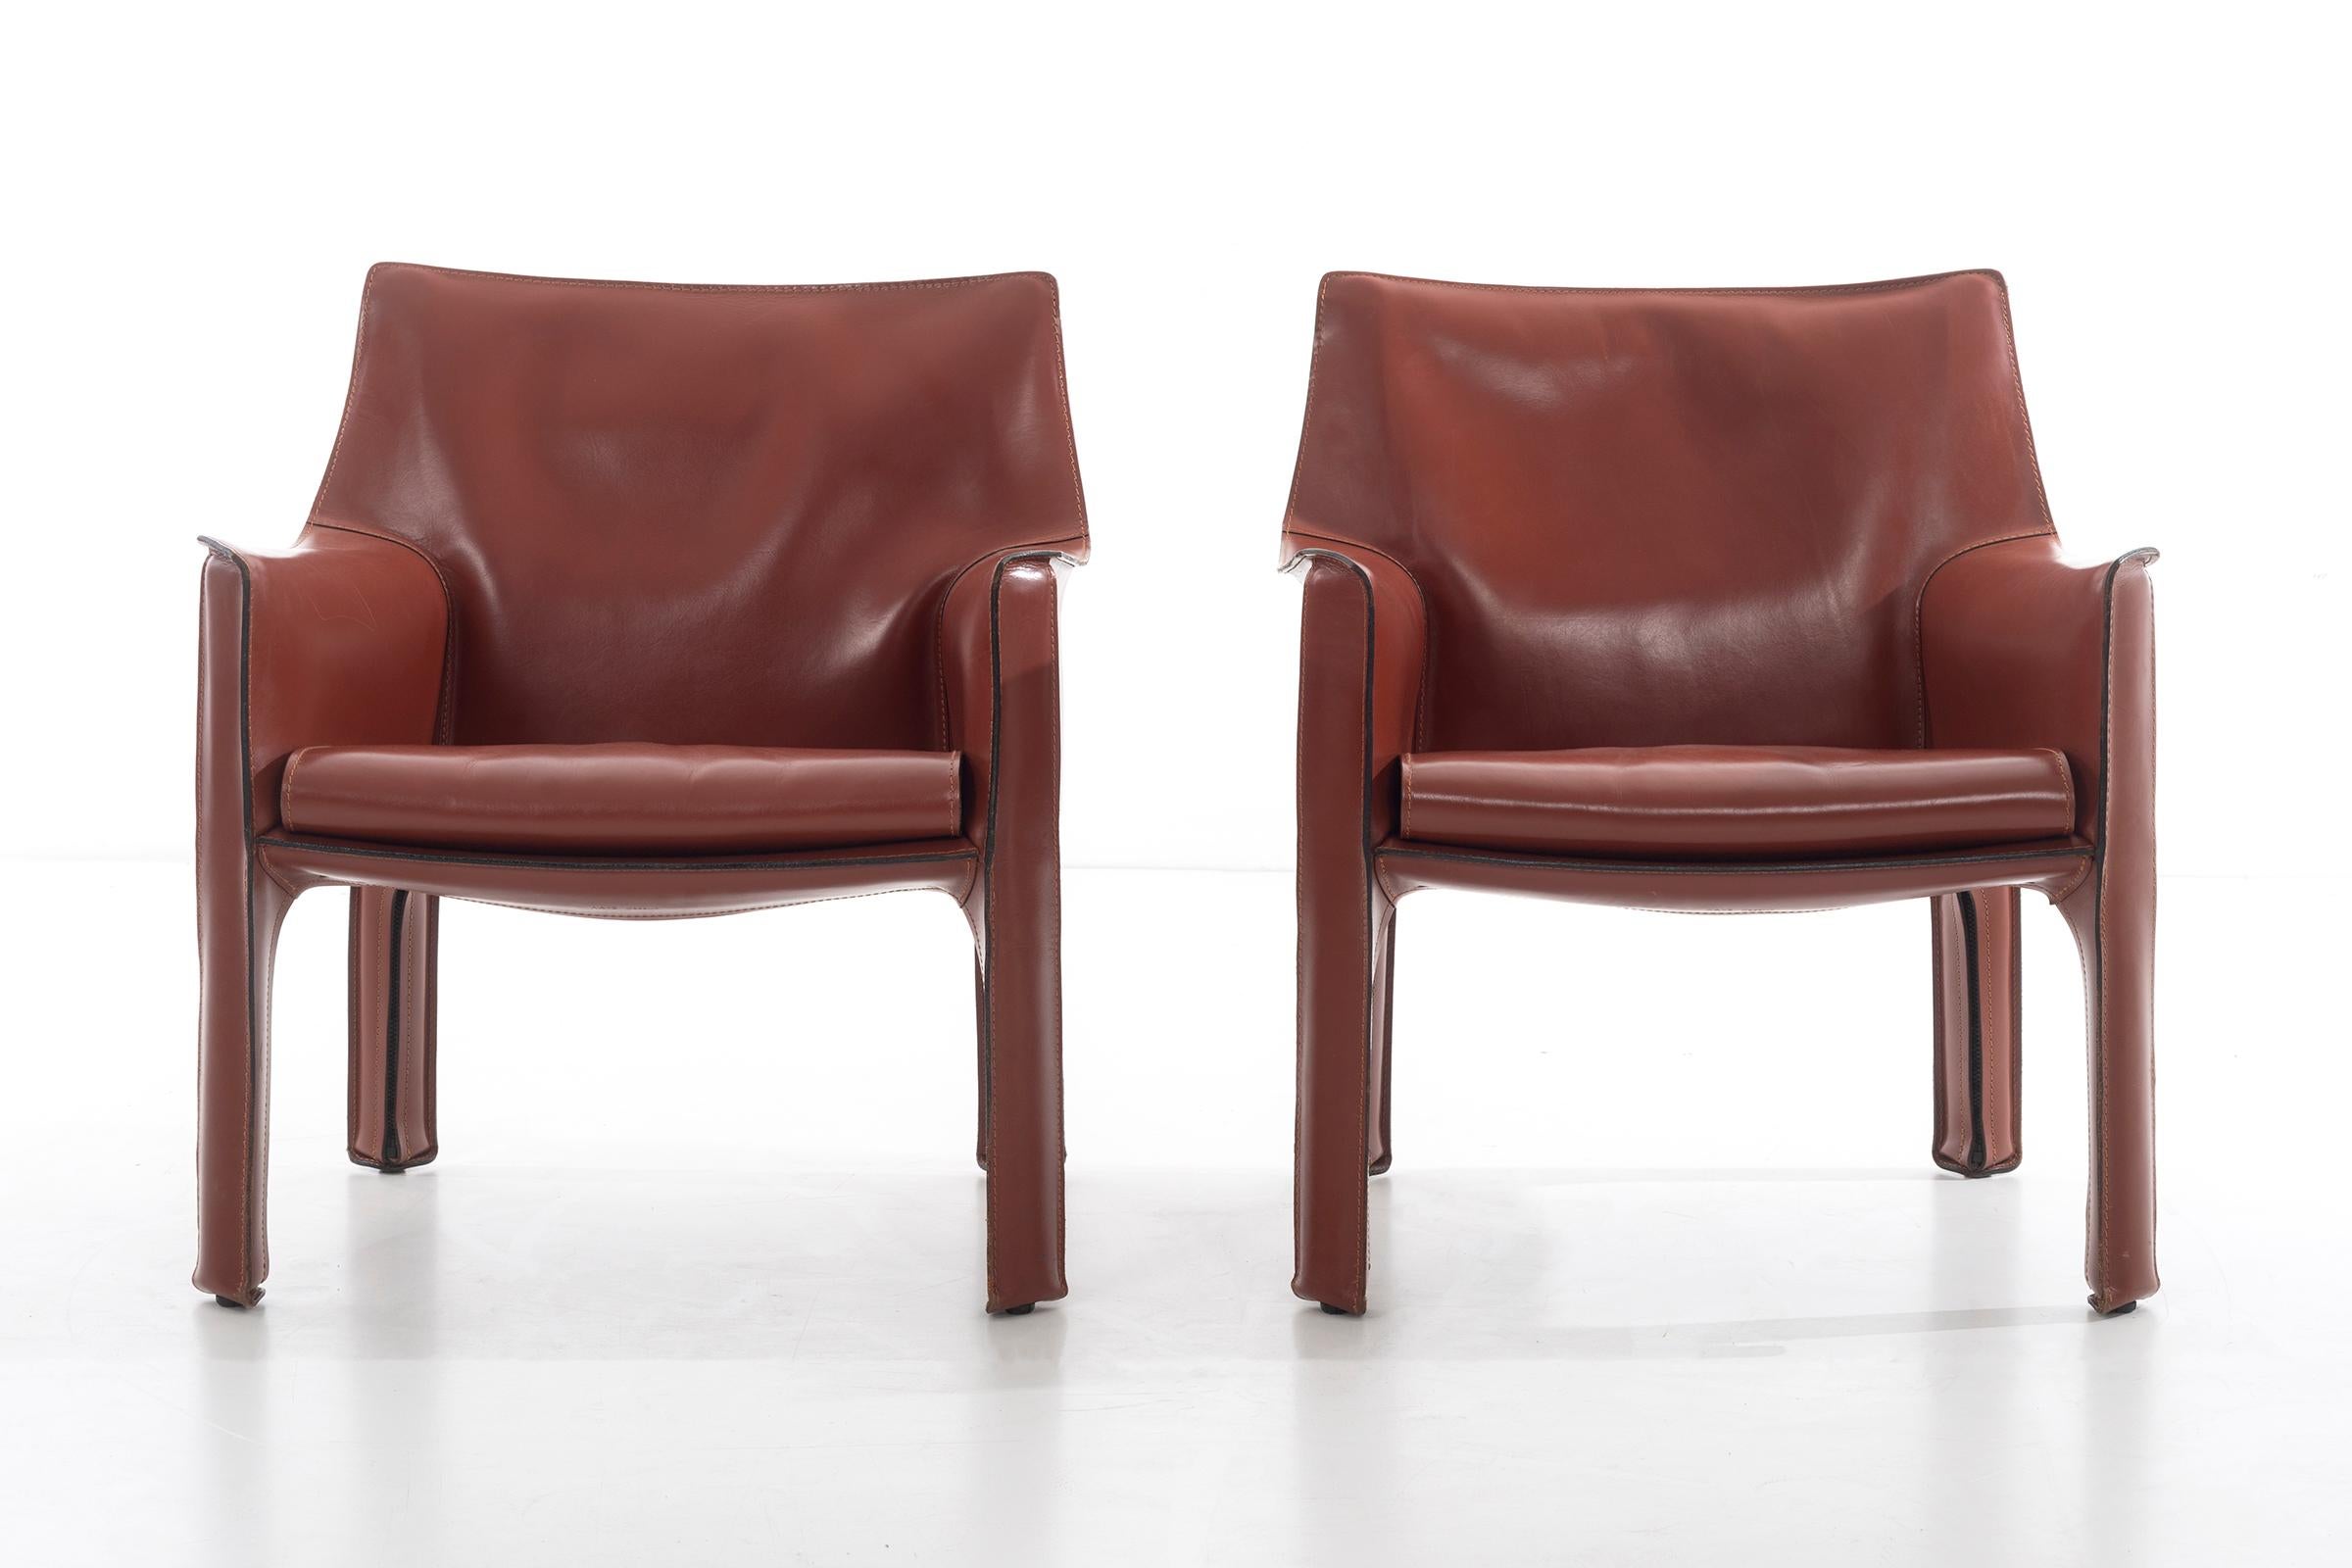 Bellini for Cassina, Cab Chairs in Cognac Italian Leather, High-Quality Chairs consists of a leather cover stretched over a minimal tubular steel frame. The only additional reinforcement is provided by a rubber membrane plate that supports the